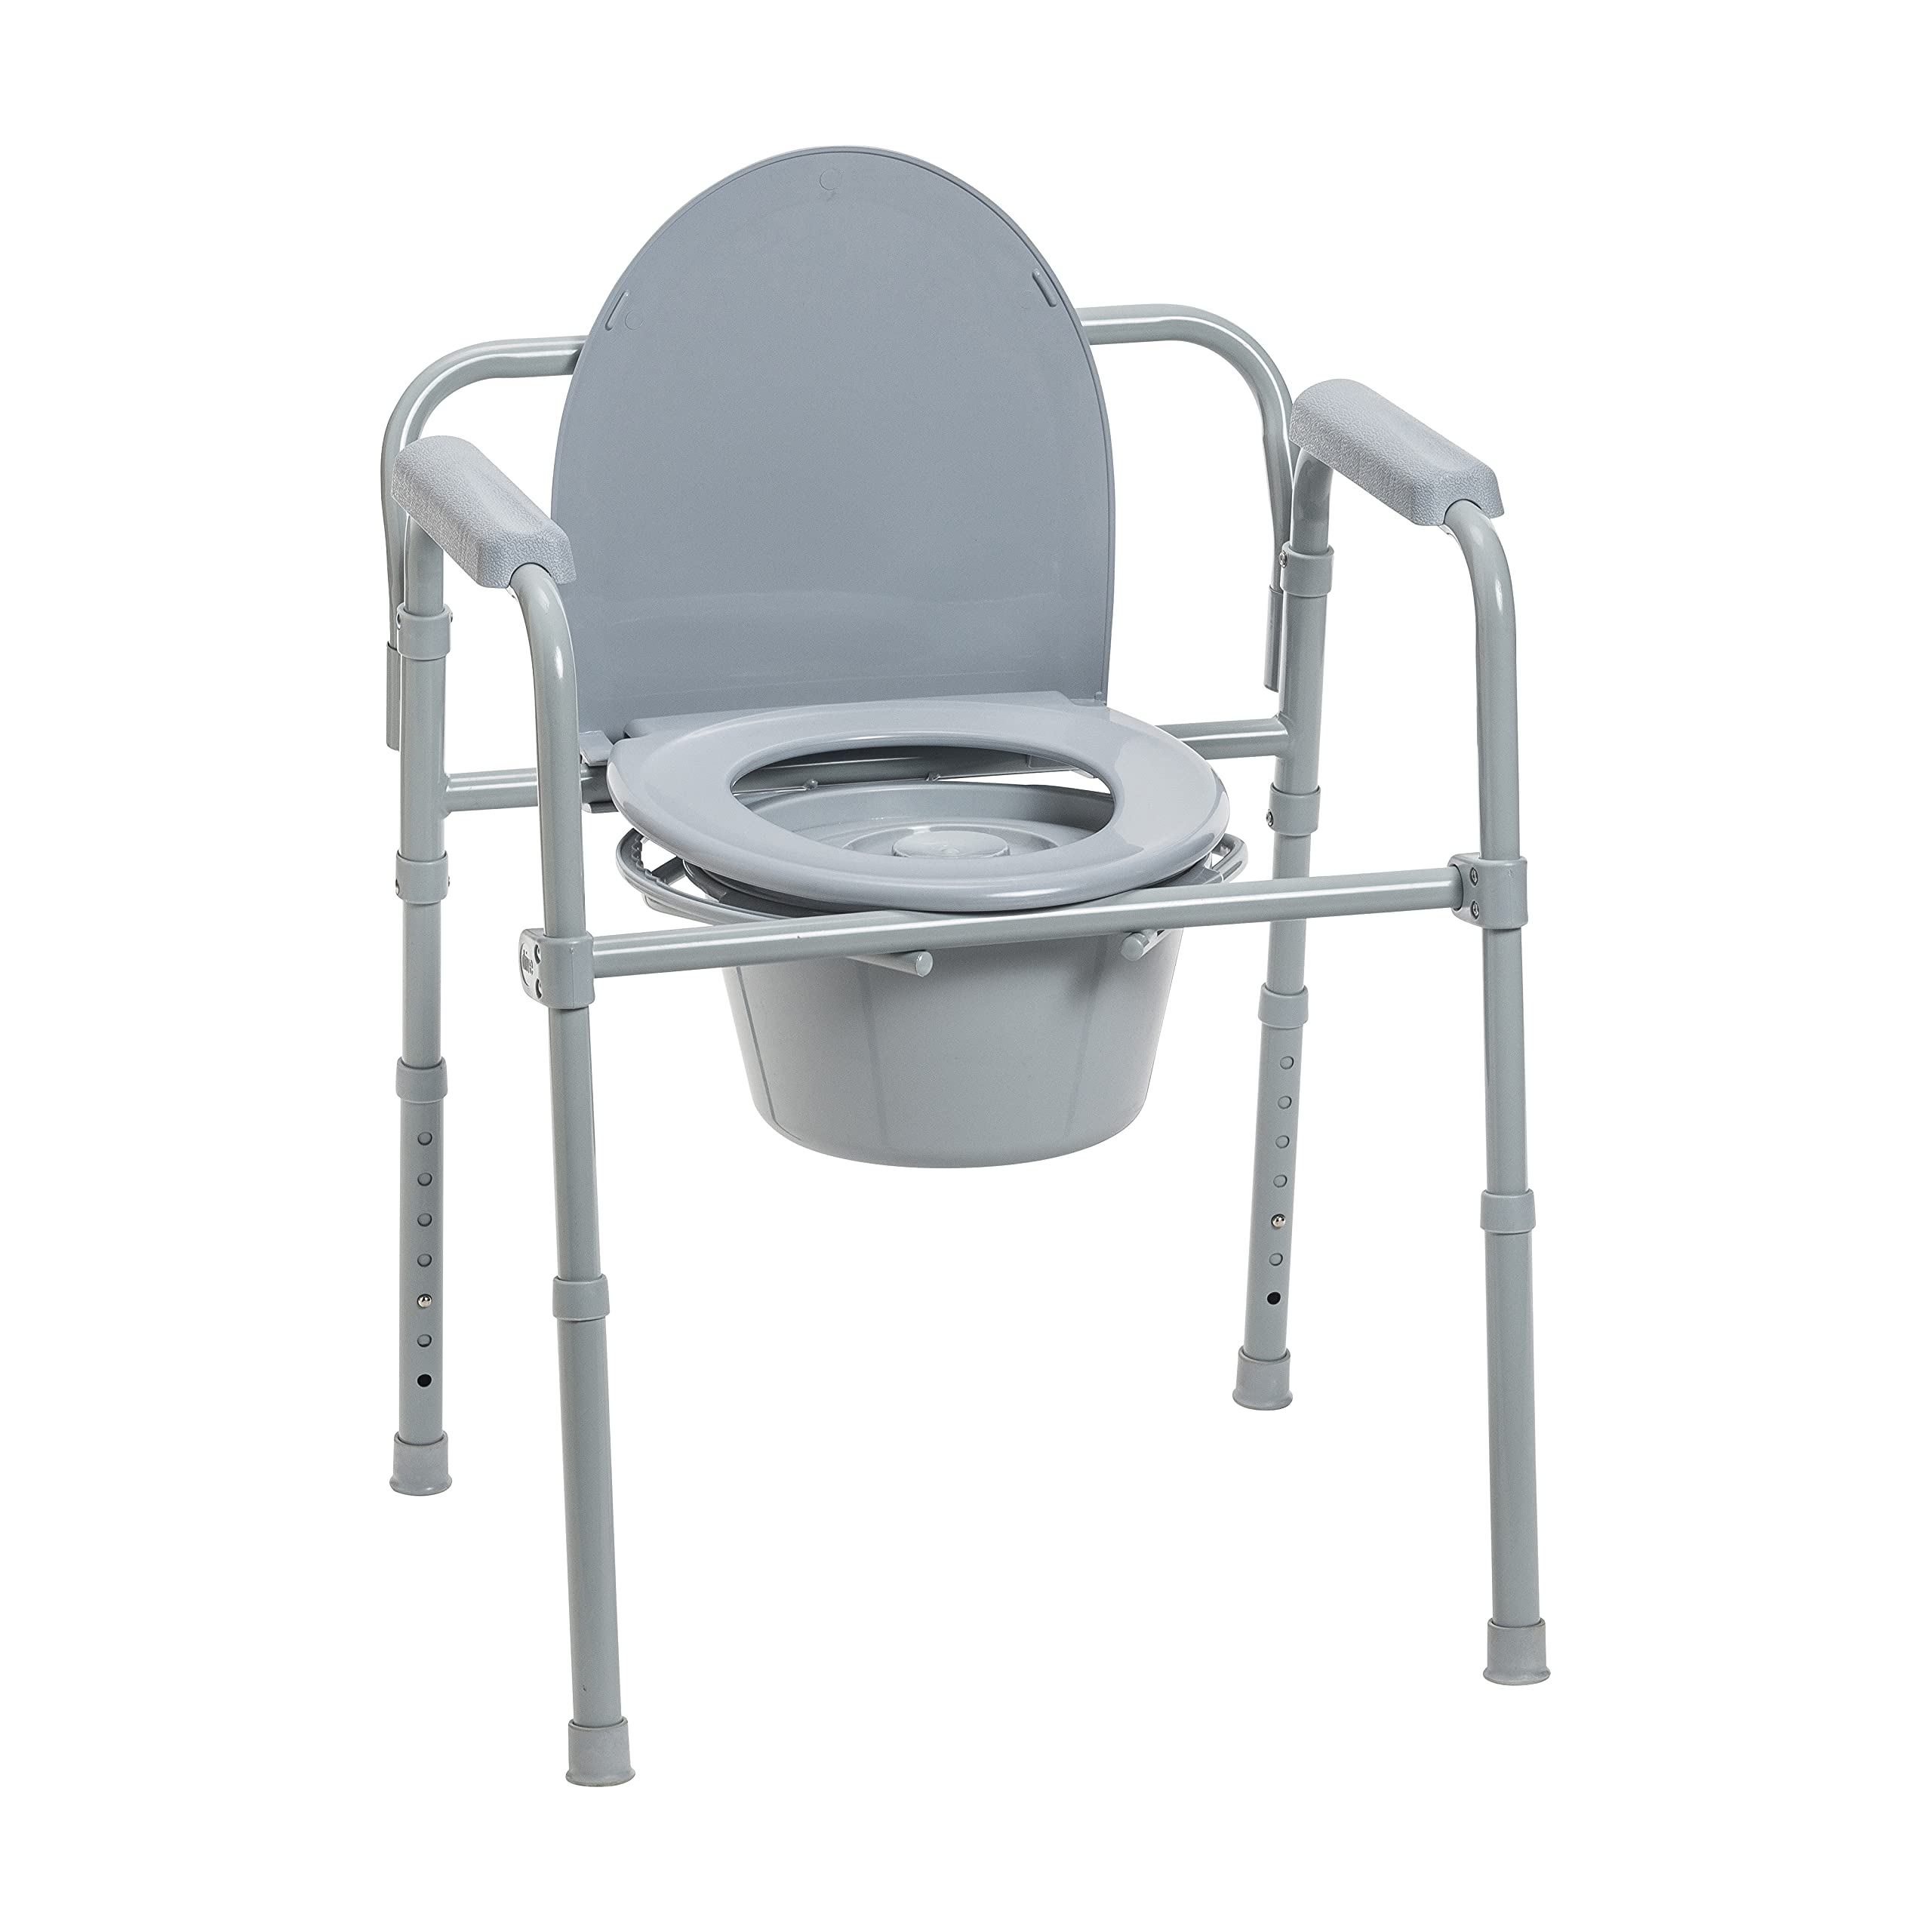 commode toilet for sale in lahore Commode toilet bedside commodes steel seat medline chair deluxe frame bucket medical help got limits mobility anyone lid rail name